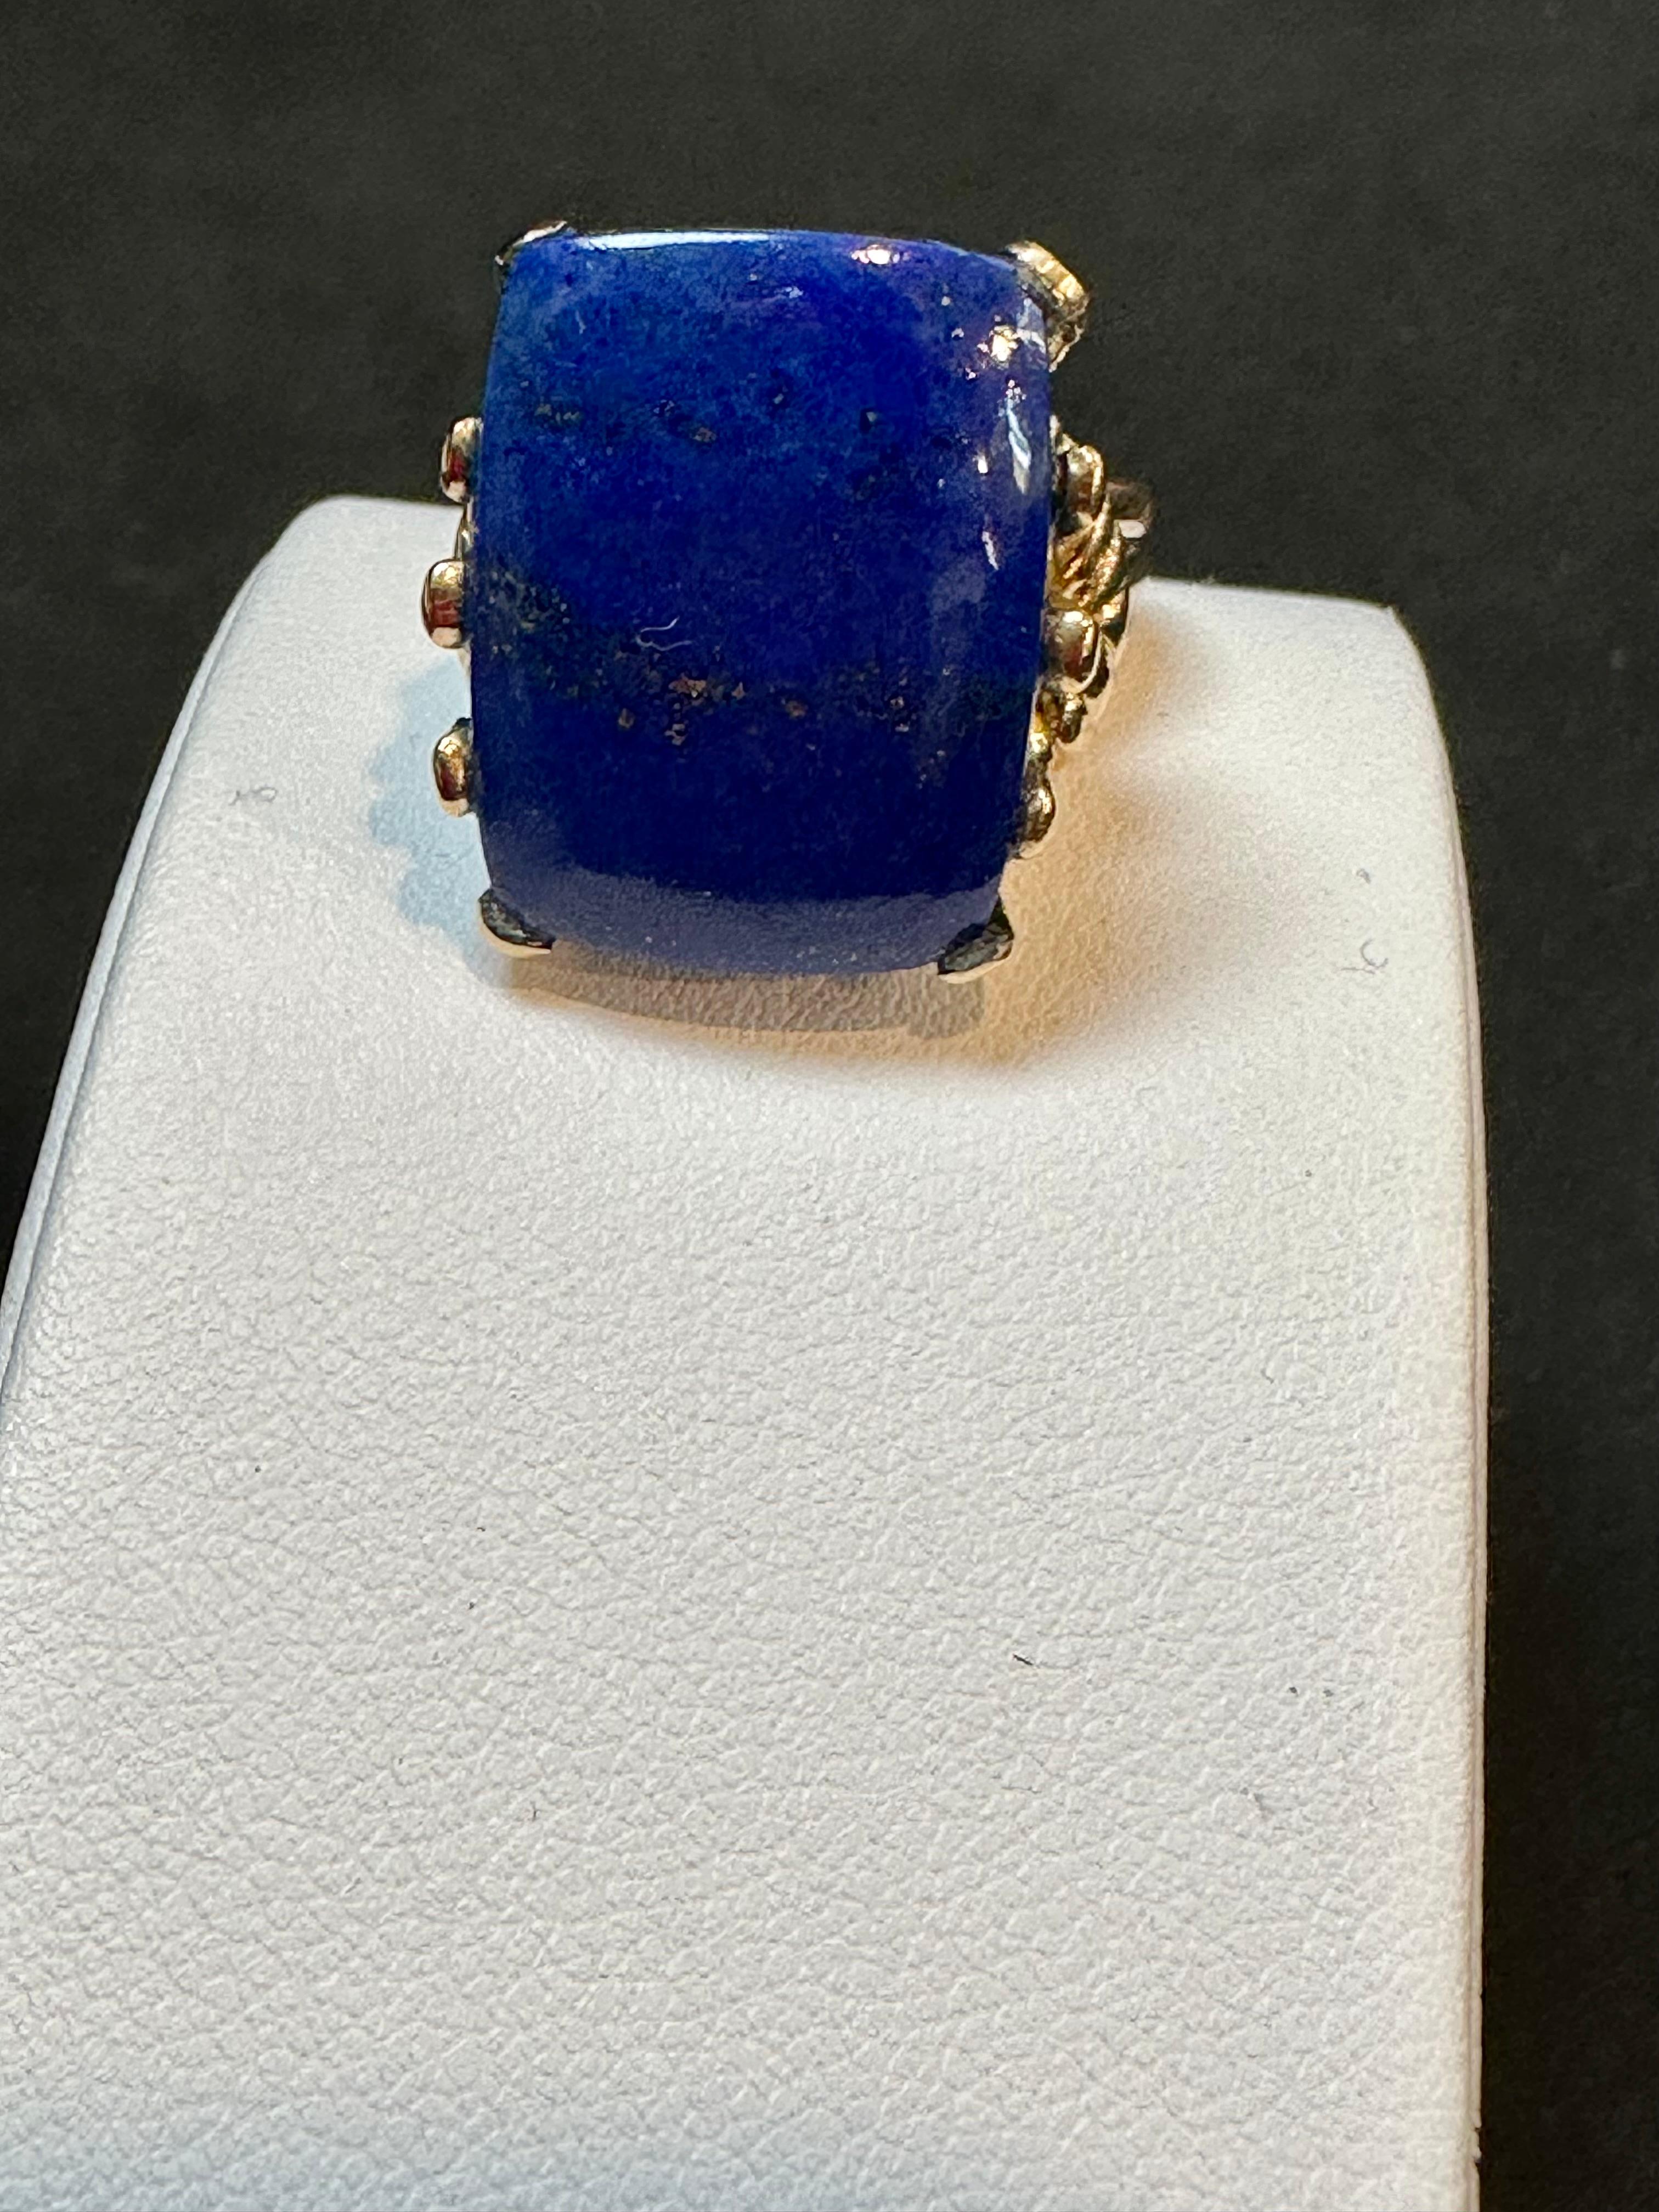 Emerald Cut 15 Ct Emerald cut Natural Lapis Lazuli Ring in 14 Kt Yellow Gold, Estate Size 7 For Sale